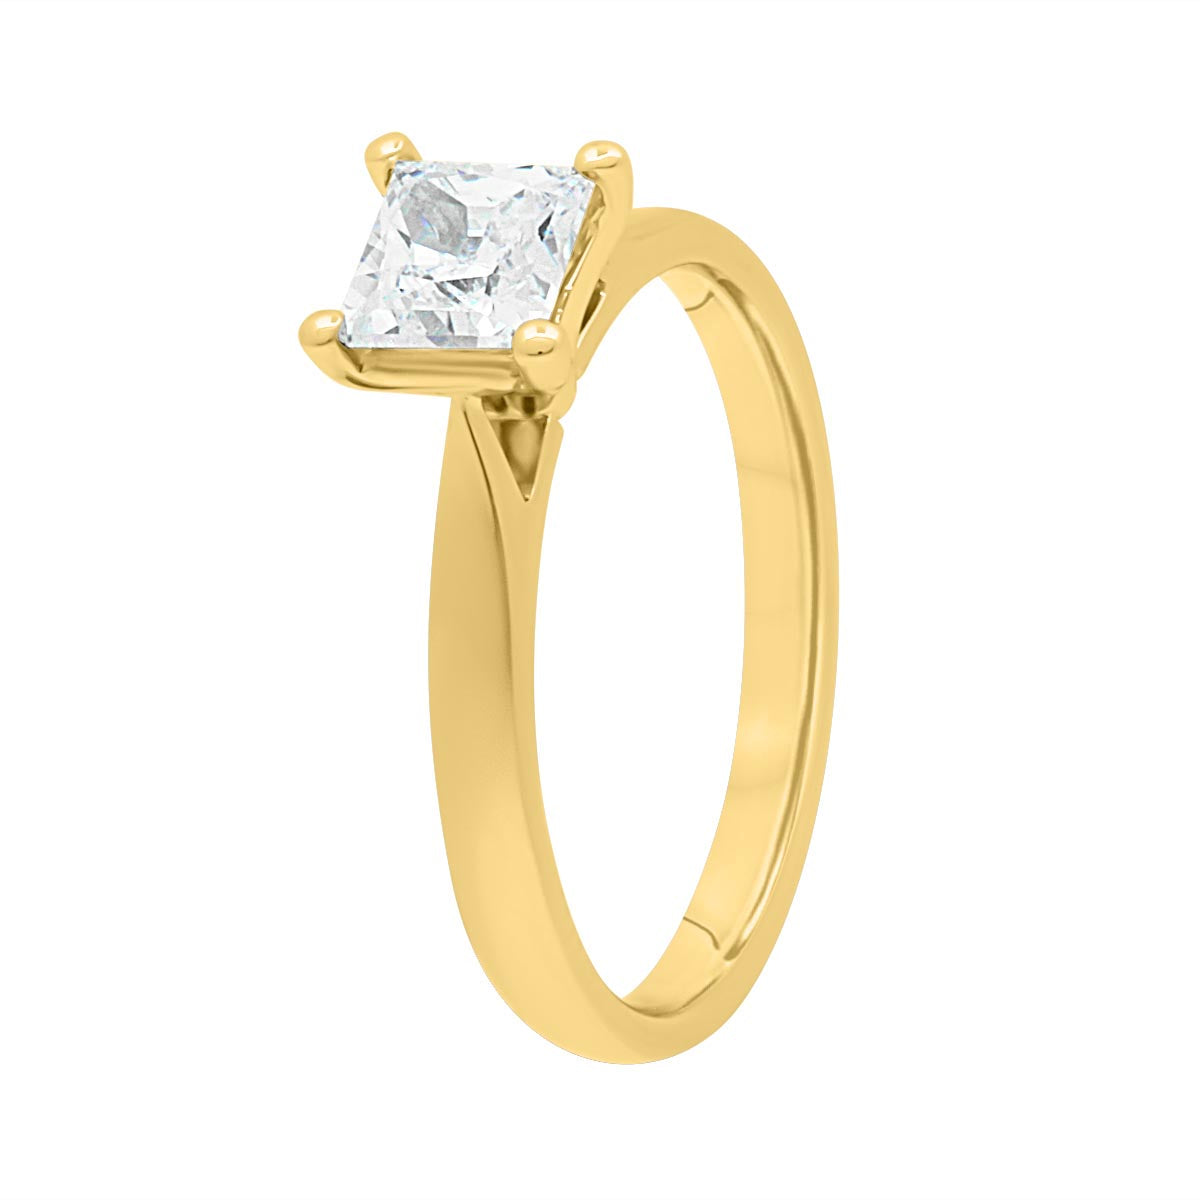 Princess Cut Diamond Ring in yellow gold upright at an angle